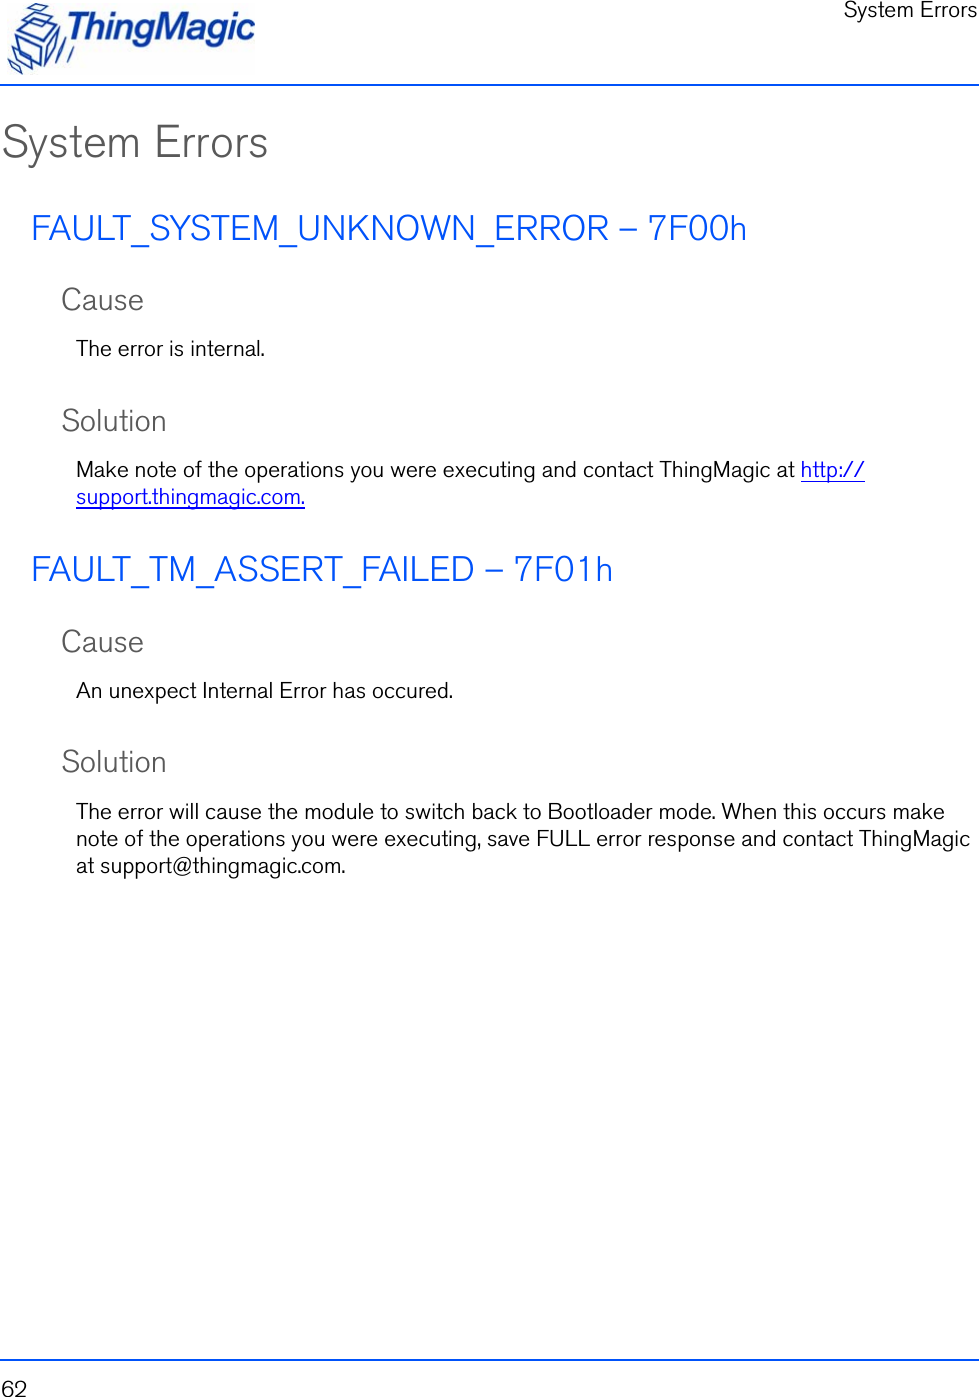 System Errors62System ErrorsFAULT_SYSTEM_UNKNOWN_ERROR – 7F00hCauseThe error is internal.SolutionMake note of the operations you were executing and contact ThingMagic at http://support.thingmagic.com.FAULT_TM_ASSERT_FAILED – 7F01hCauseAn unexpect Internal Error has occured.SolutionThe error will cause the module to switch back to Bootloader mode. When this occurs make note of the operations you were executing, save FULL error response and contact ThingMagic at support@thingmagic.com.